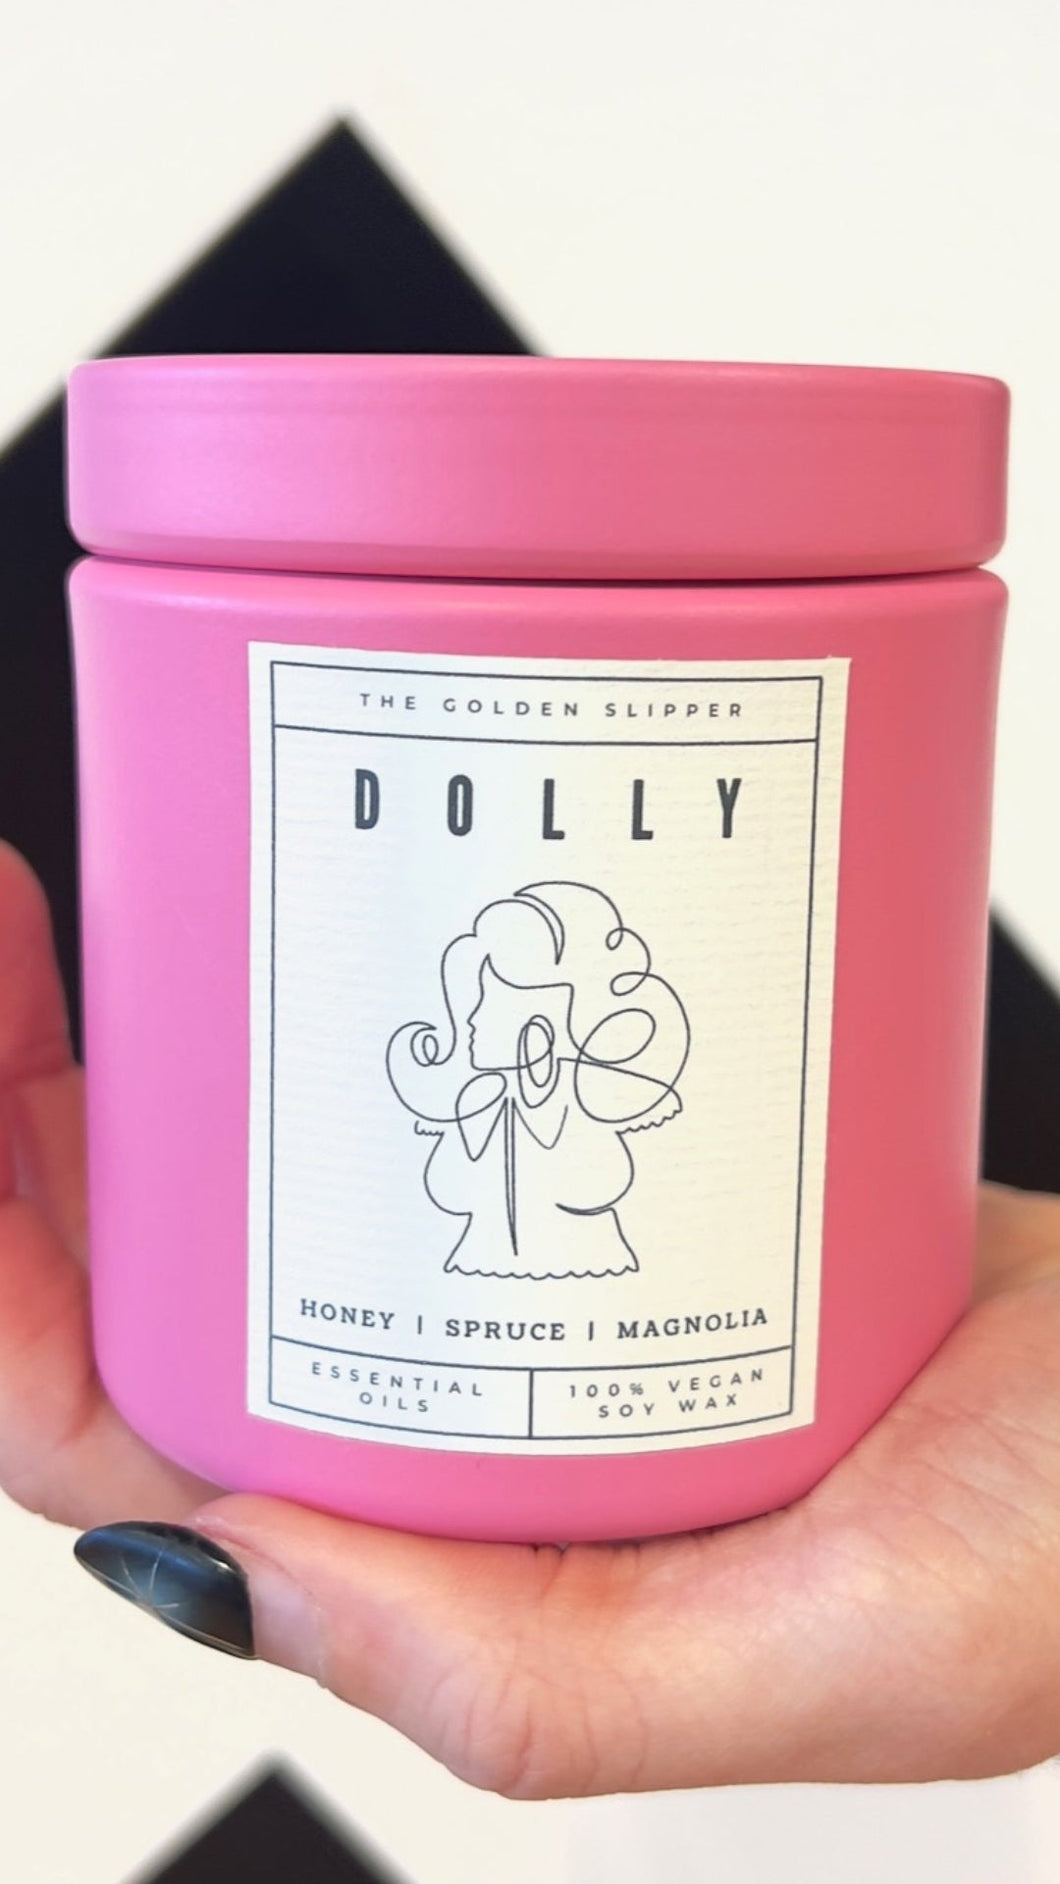 Dolly - Pink Candle